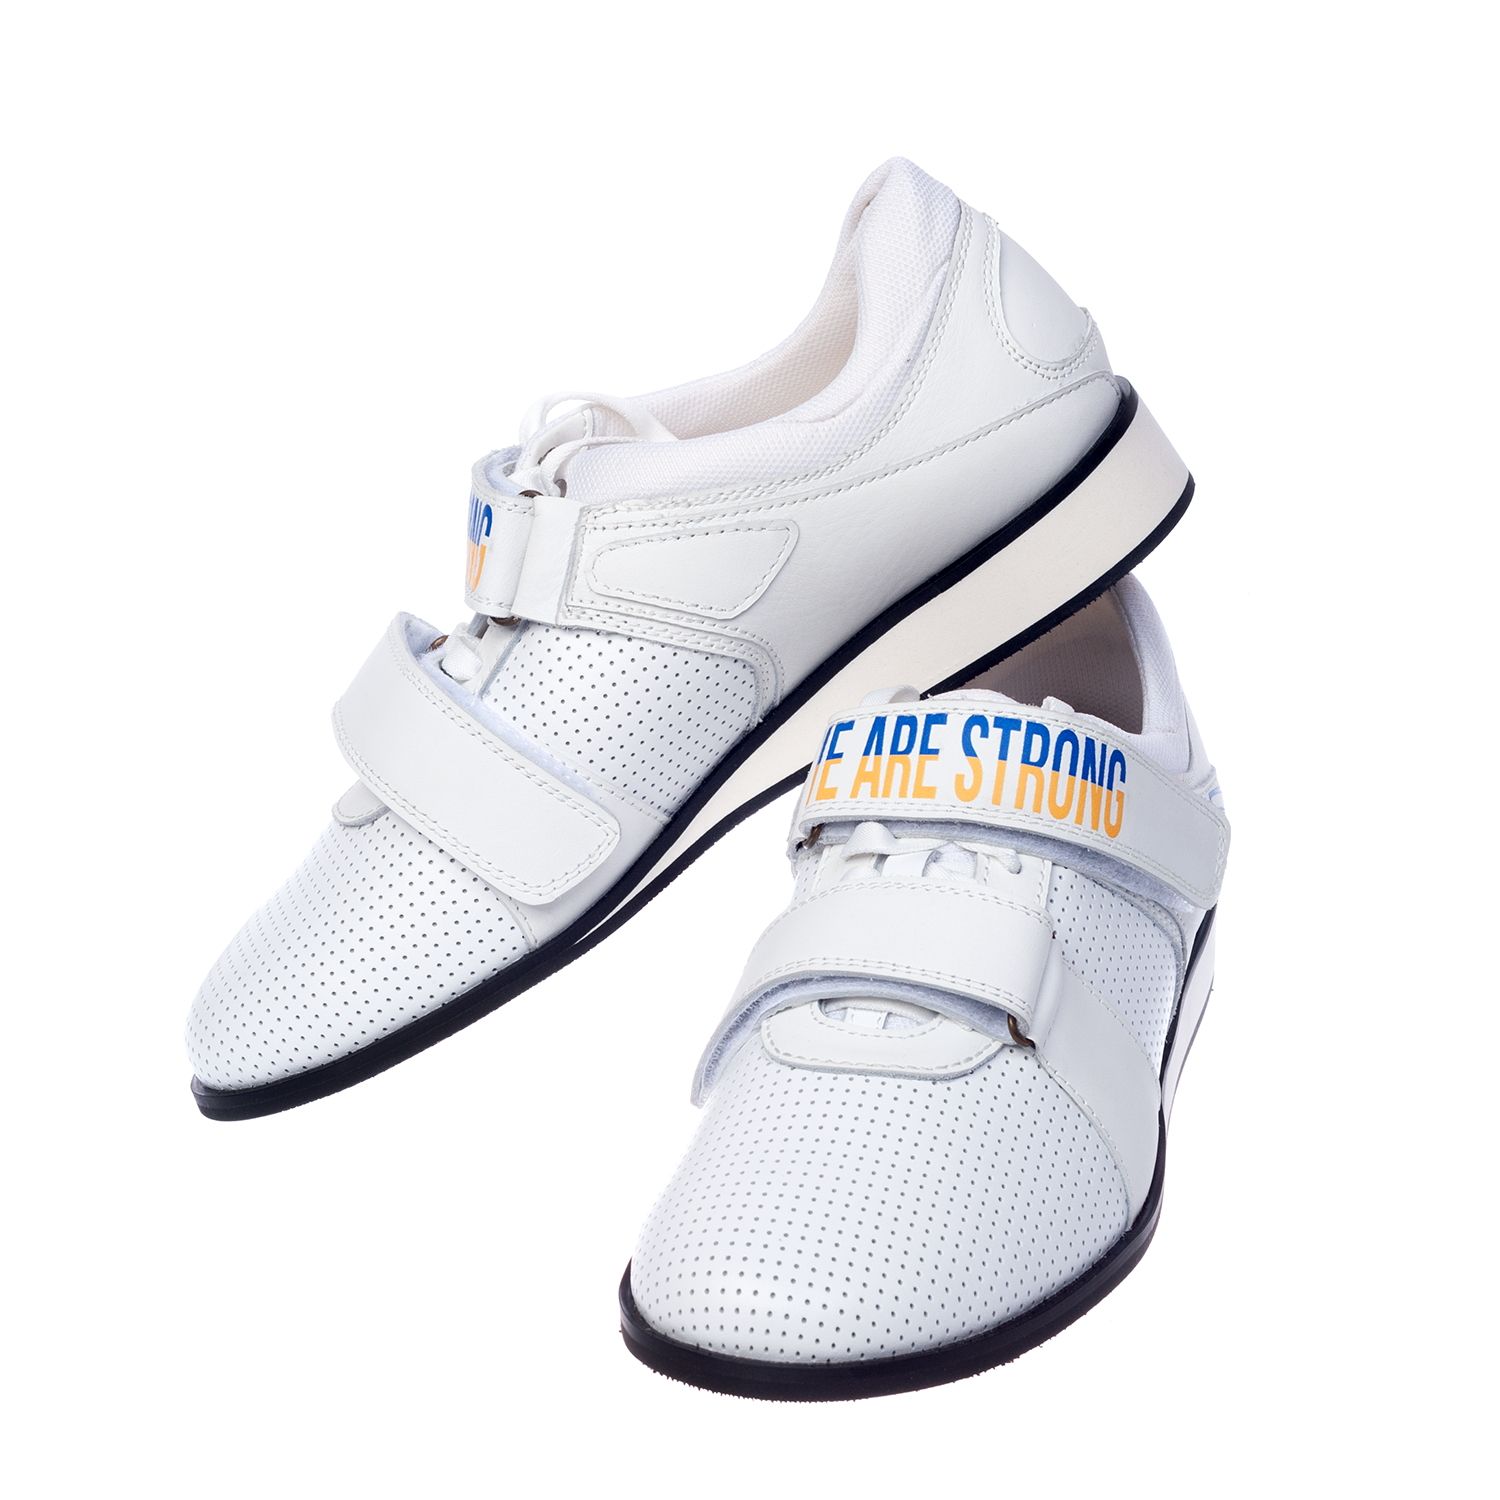 Weightlifting shoes  We are strong, white, size 41 (UKR)